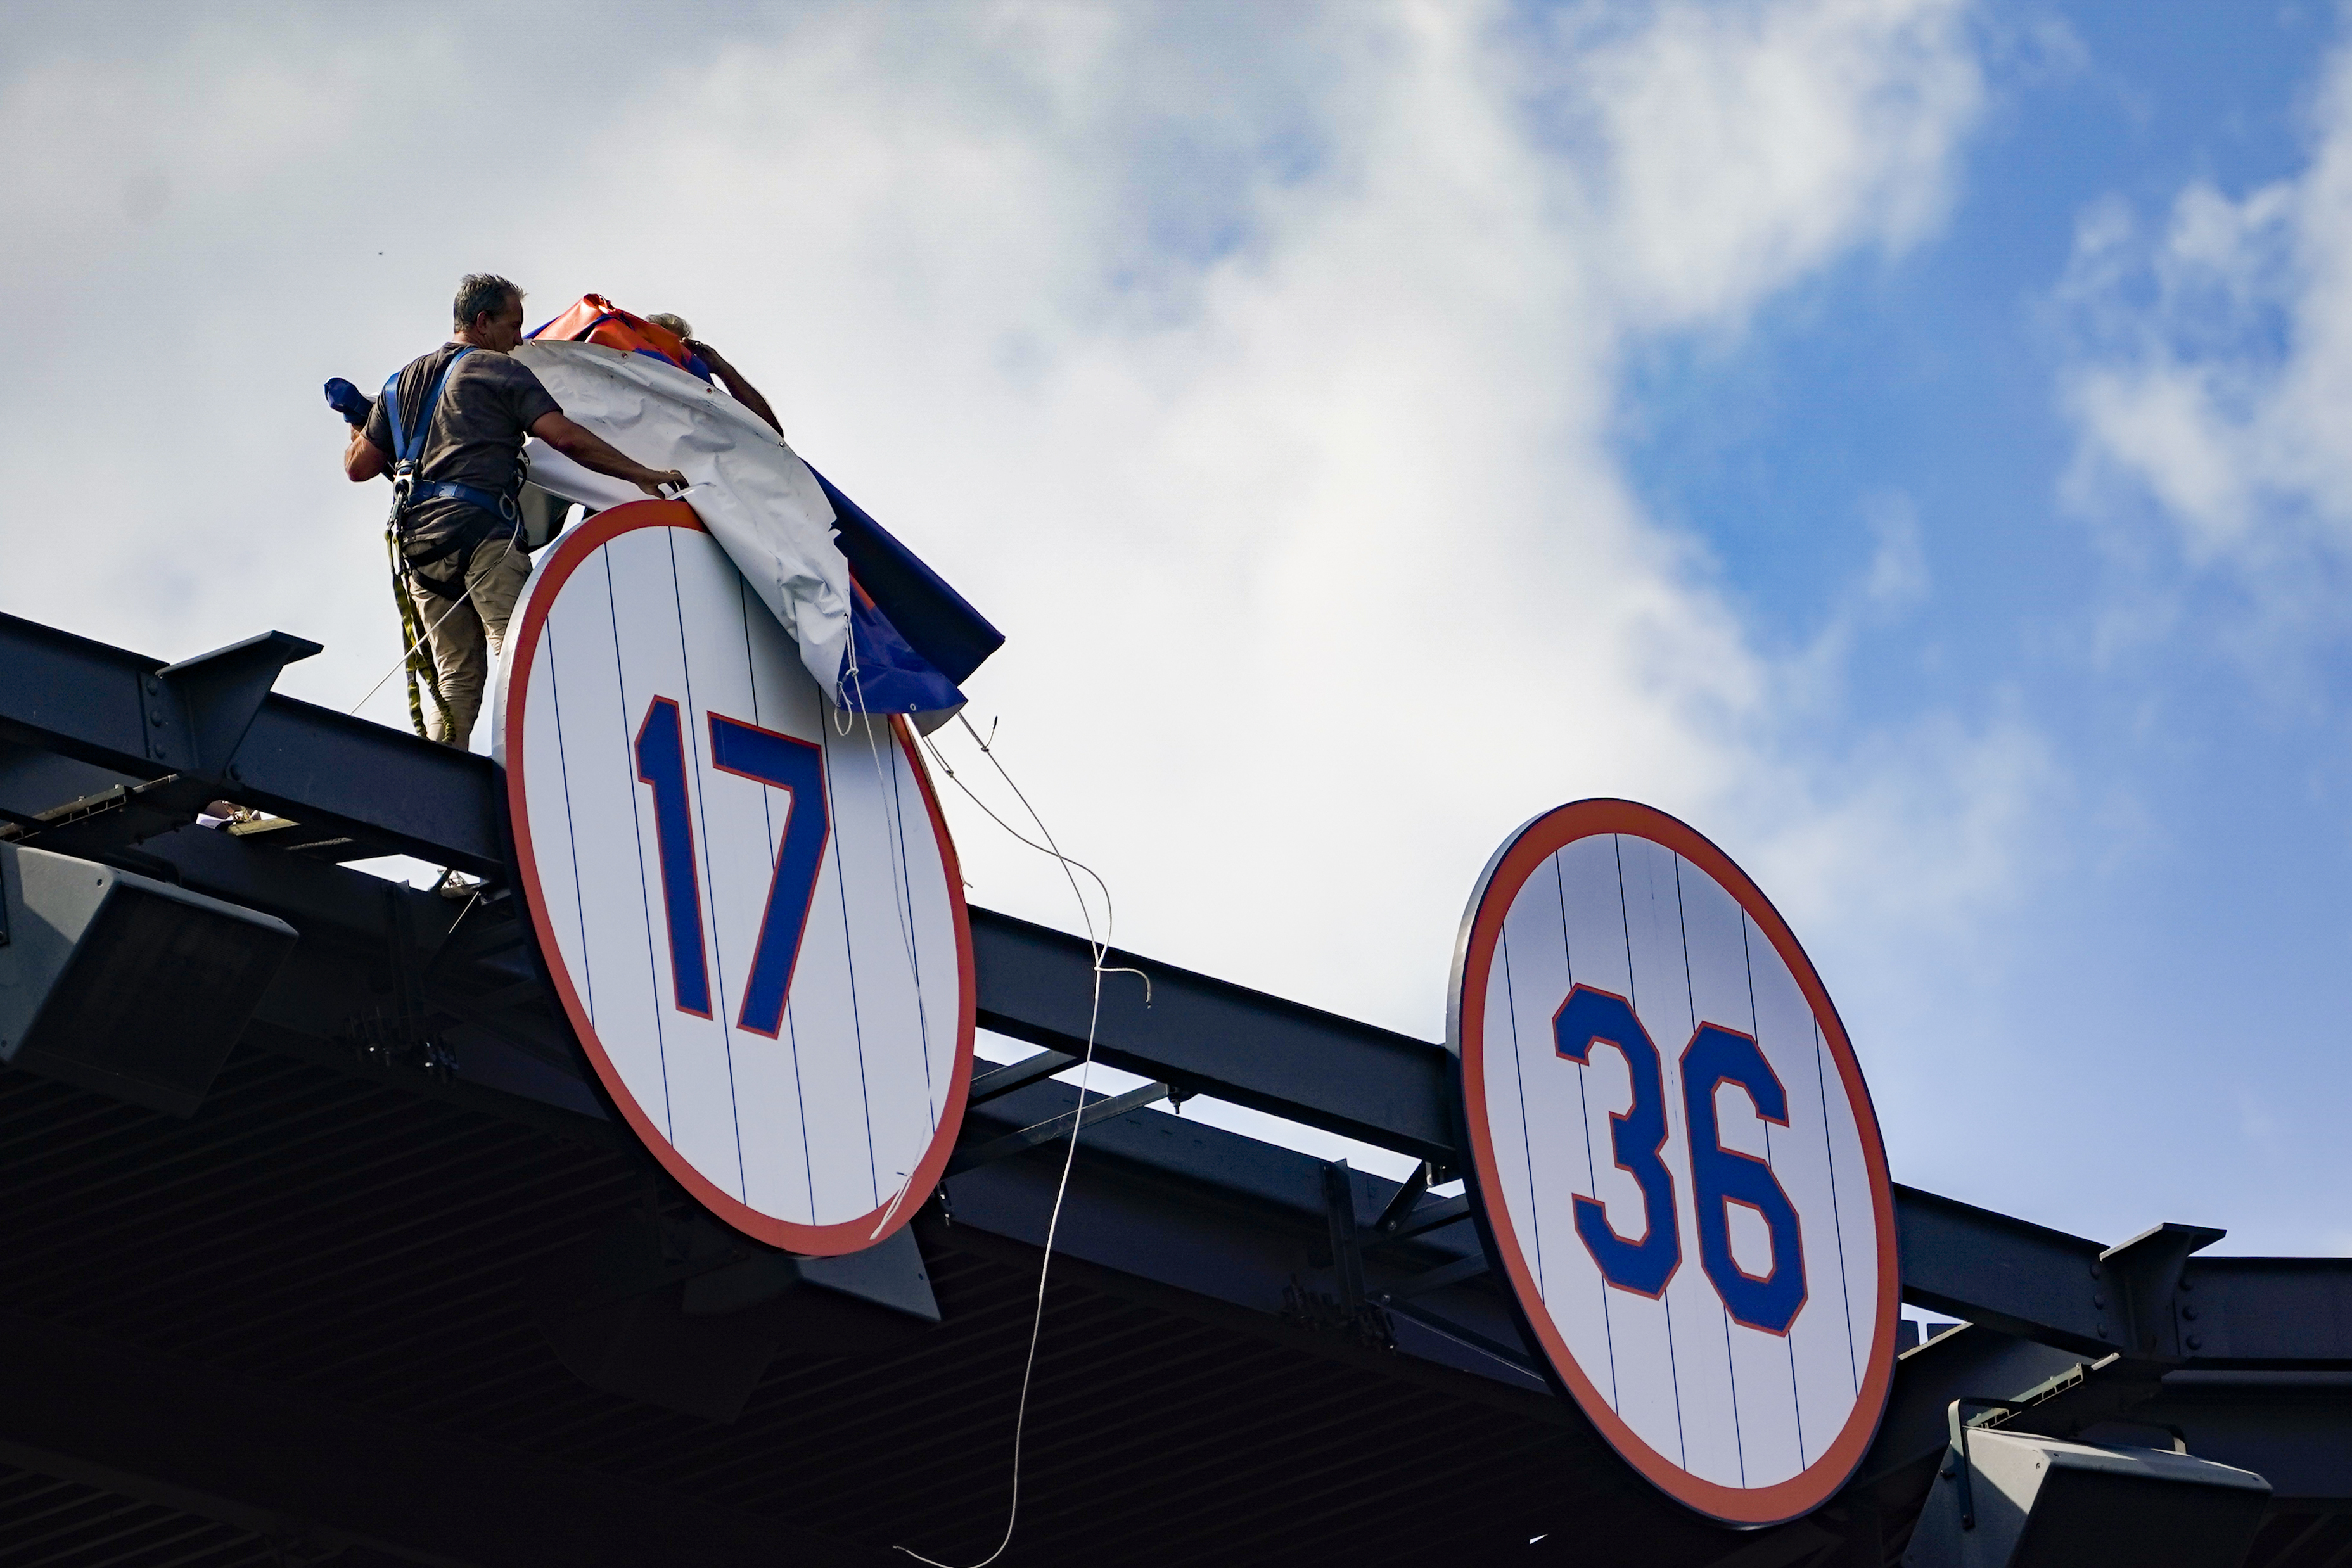 The Mets' retired numbers on the left field wall at Citi F…